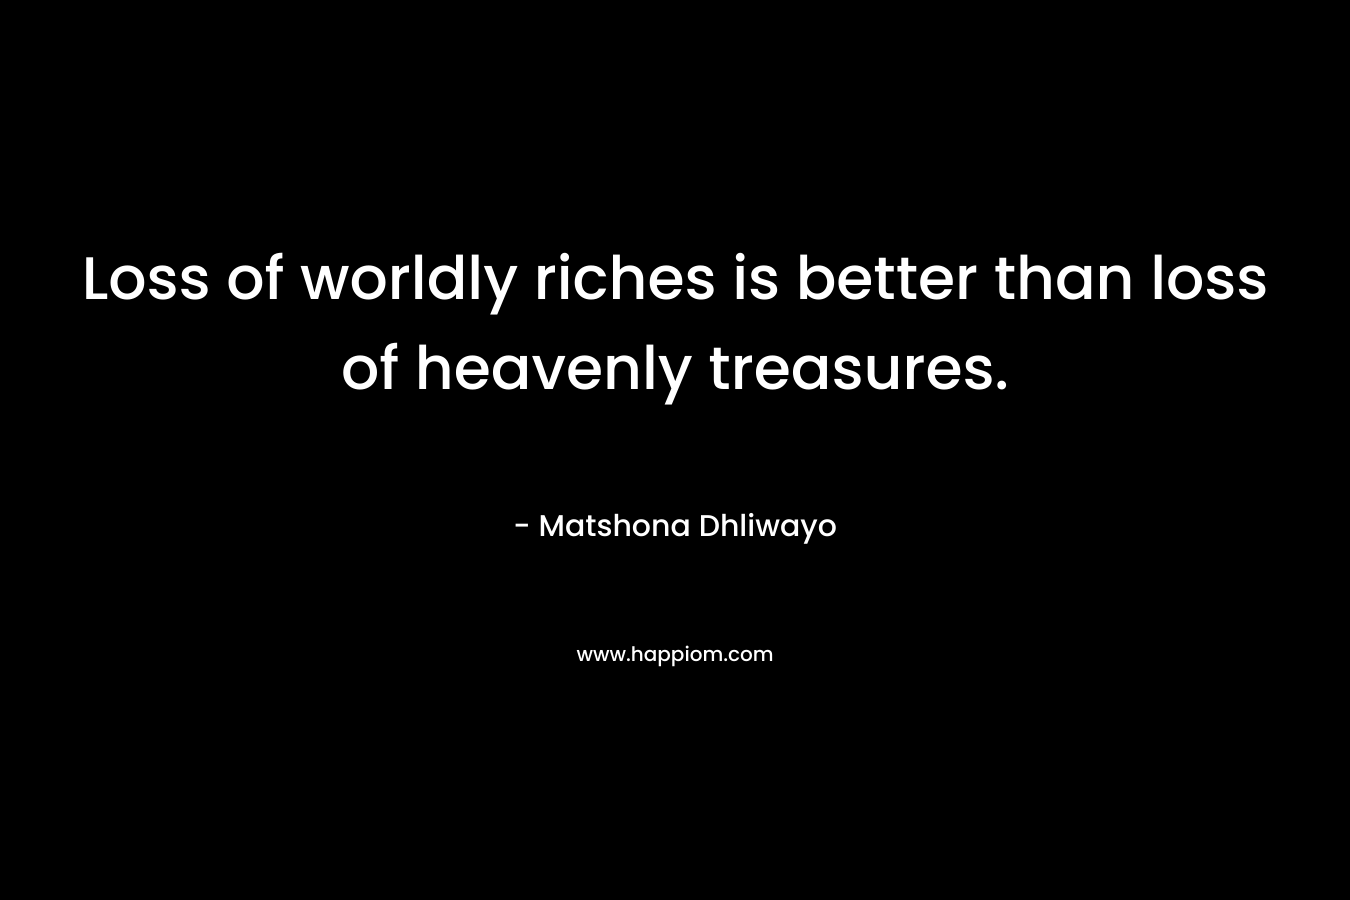 Loss of worldly riches is better than loss of heavenly treasures.